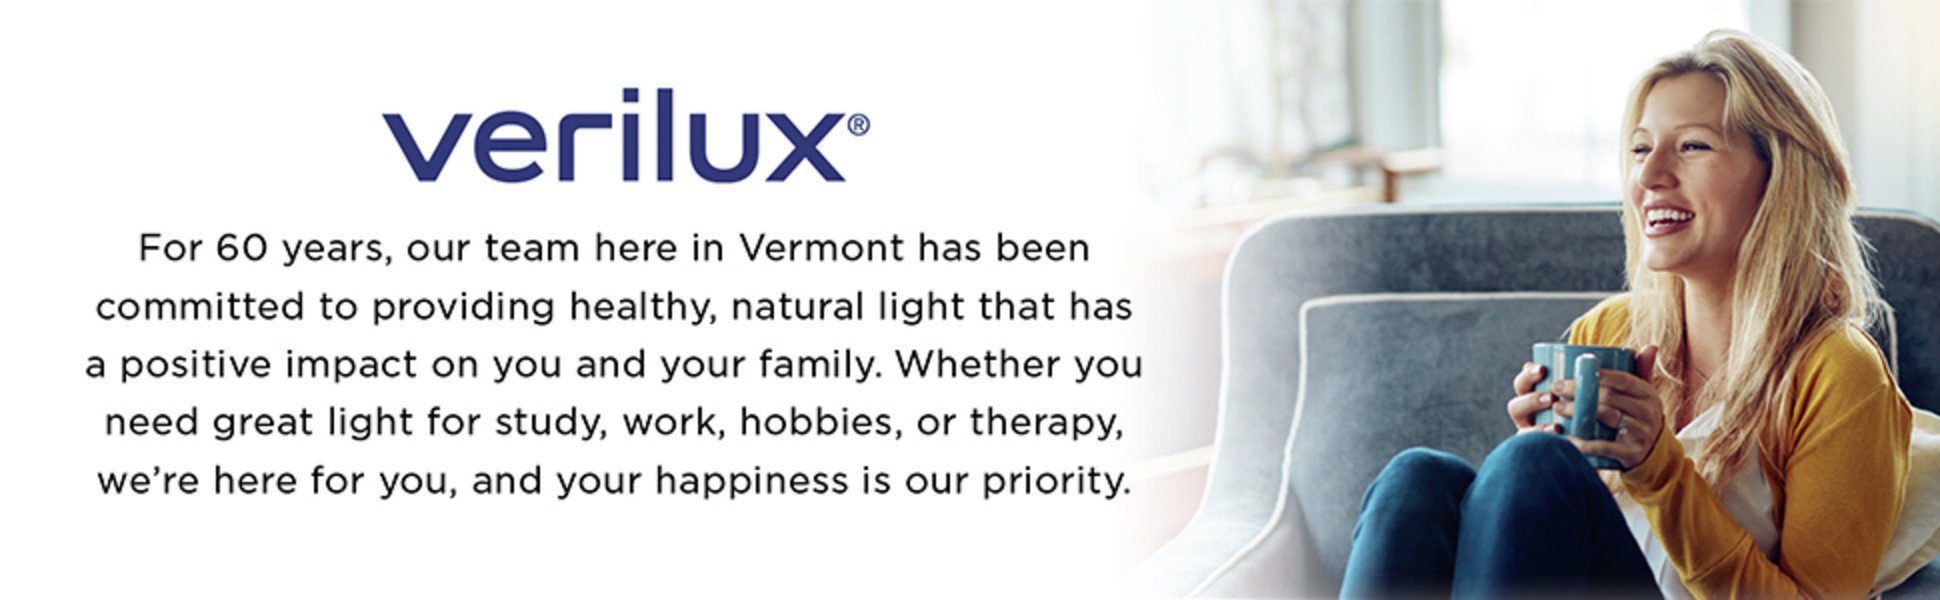 Verilux® HappyLight® Full-Size - UV-Free Therapy Lamp, Bright White Light  with 10,000 Lux, Adjustable Brightness, 2 Interchangeable Lenses,  Detachable